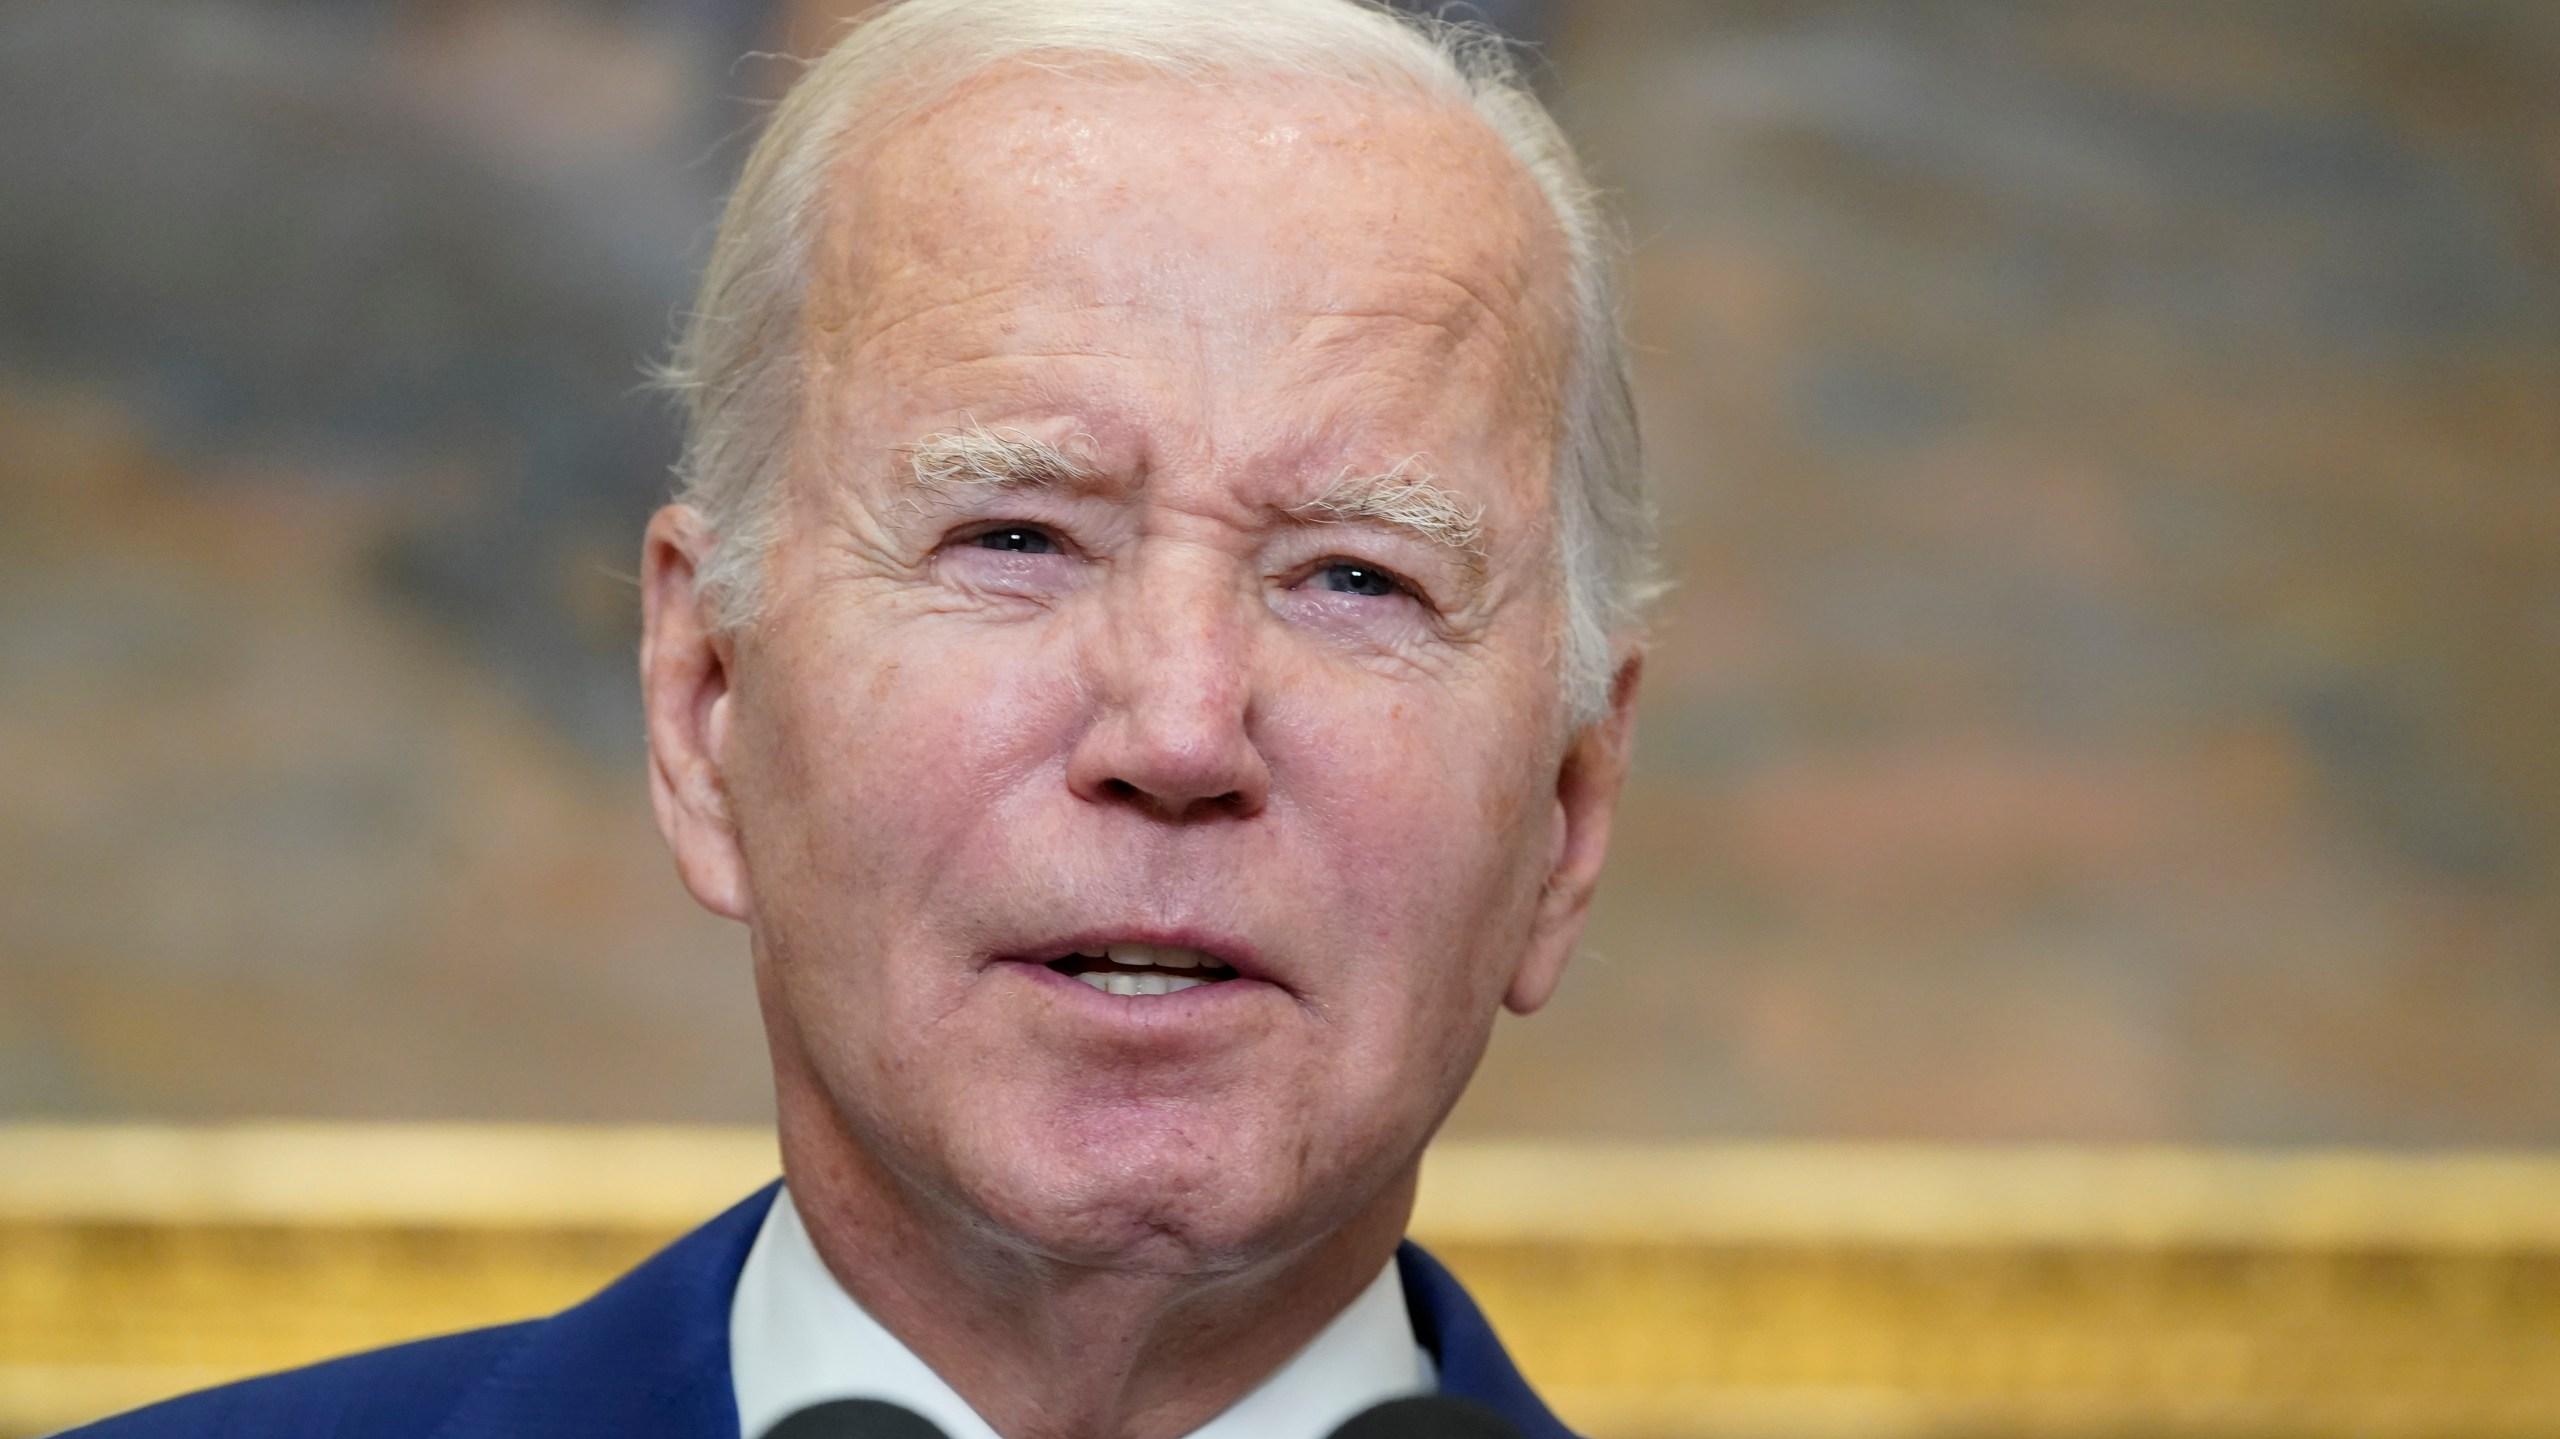 Biden says theres not much time to keep aid flowing to Ukraine